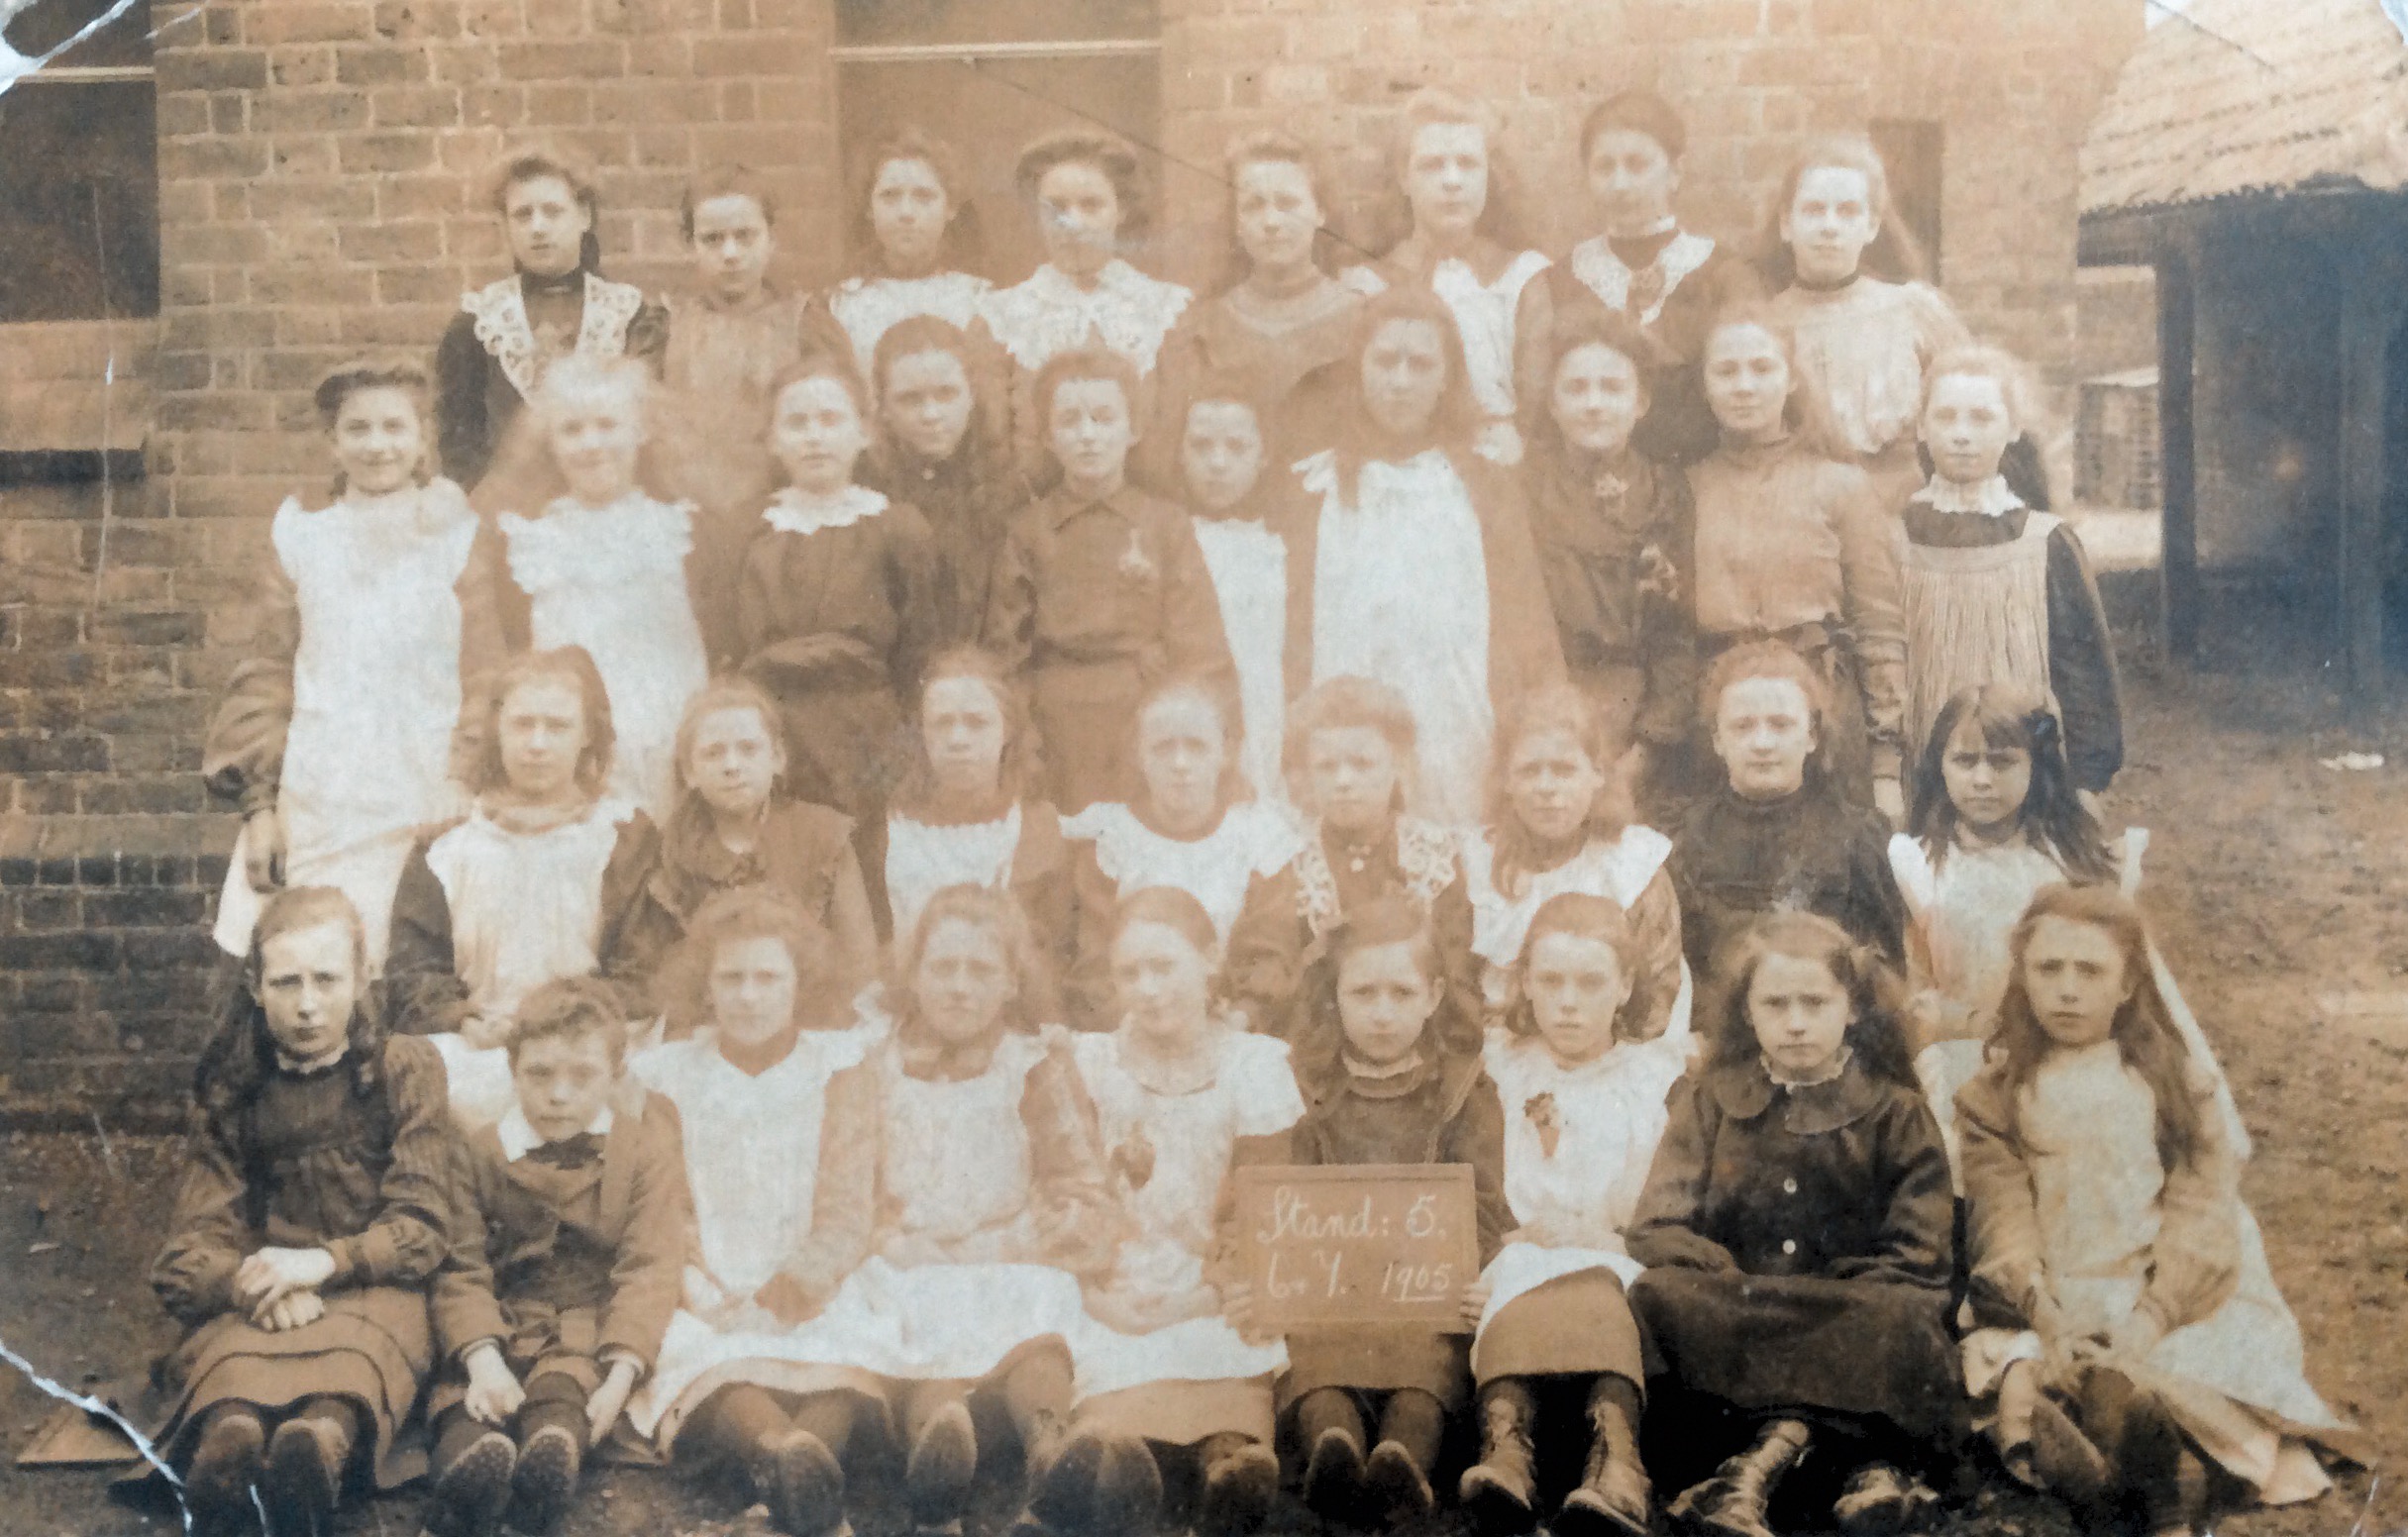 School photo from 1905. Probably my grandmother Gertrude Manley holding the plaque.